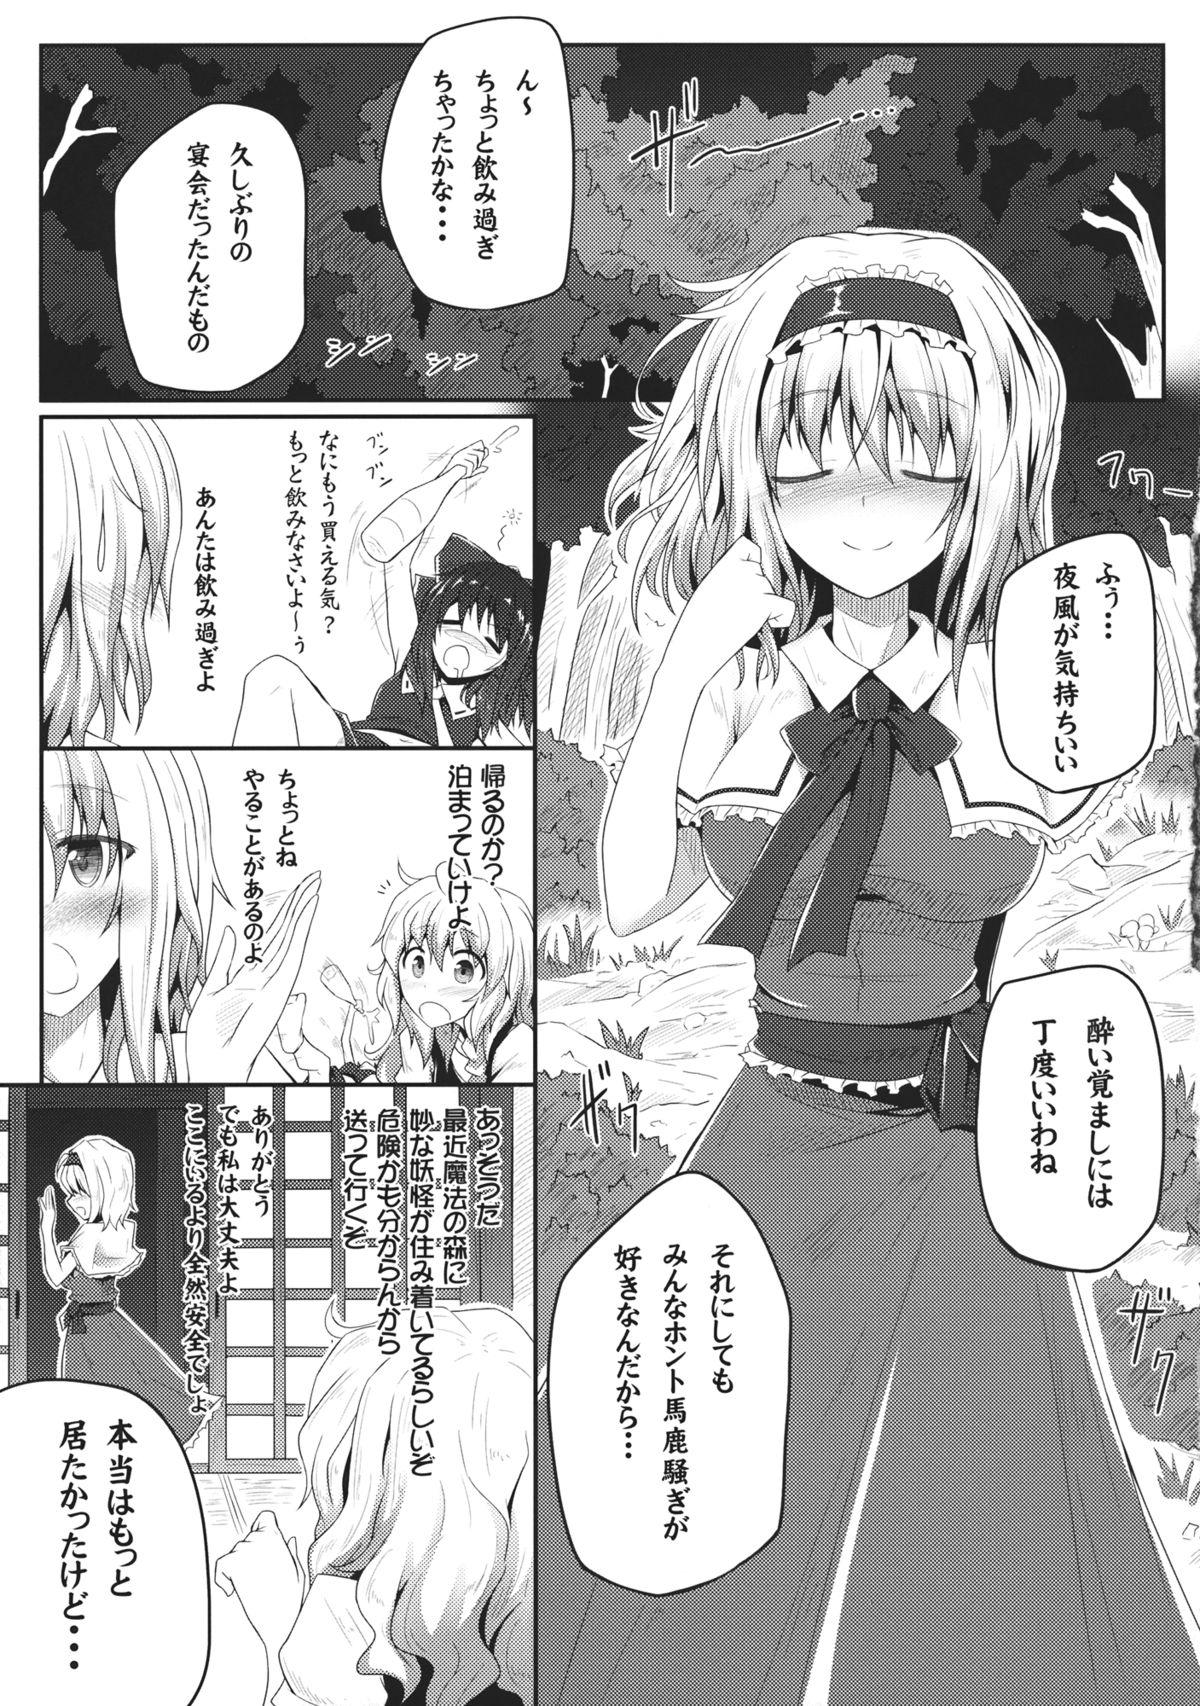 Striptease Nozomiusu - Touhou project Missionary Porn - Page 4